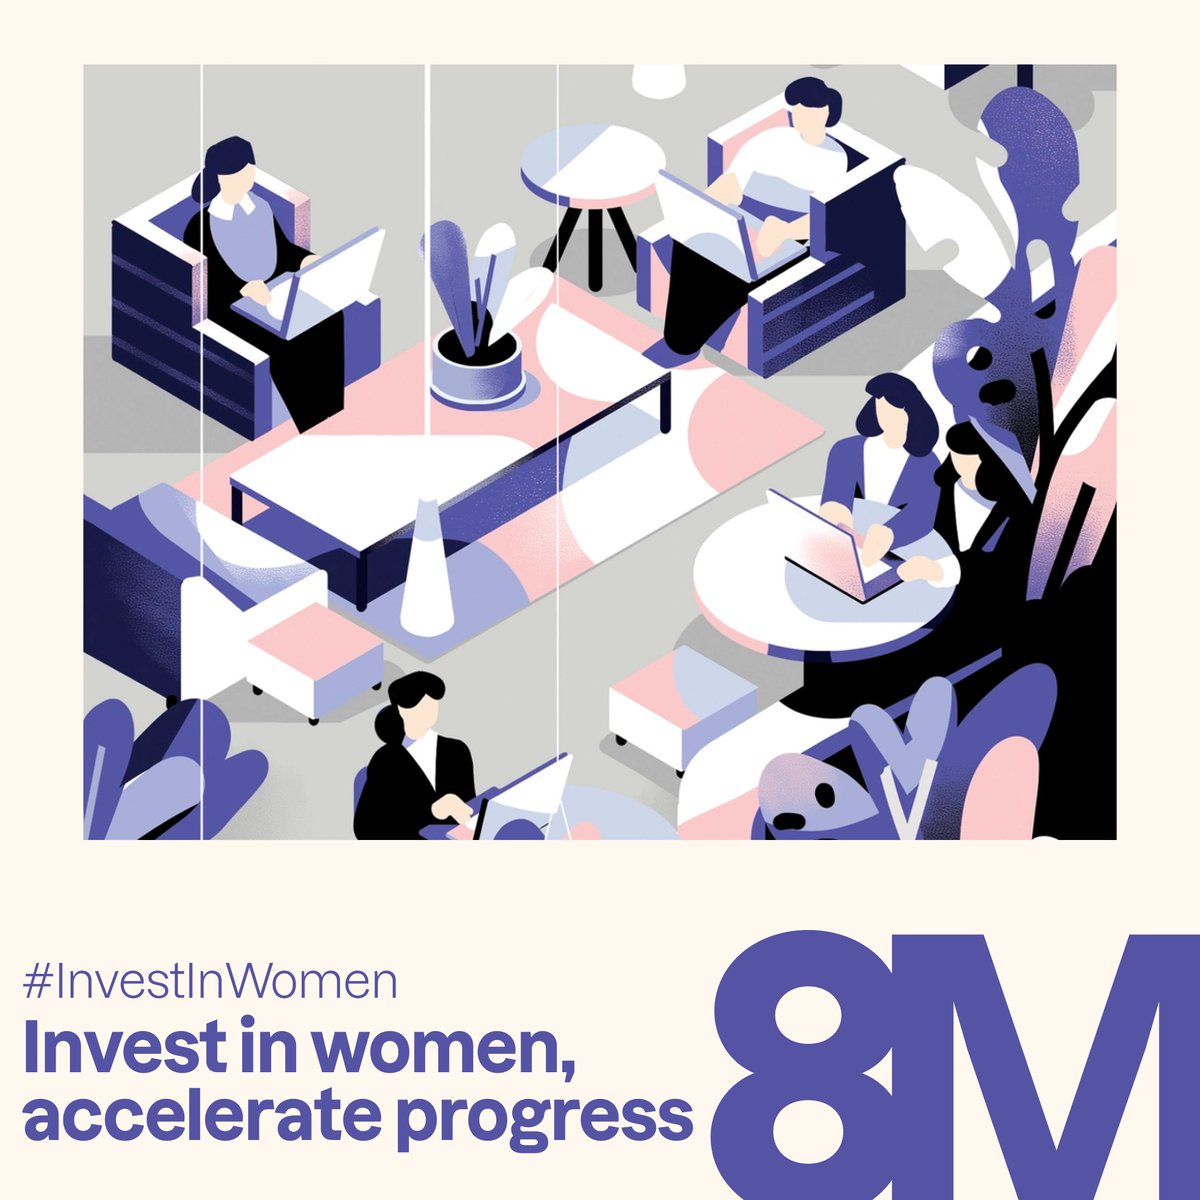 #genderequality remains the greatest #humanrights challenge. And to face it, investing in women and girls is key.

At Arionkoder, we're committed to driving progress and #equity: let's build a world where everyone has equal opportunities to thrive.

#IWM2024 #investinwomen